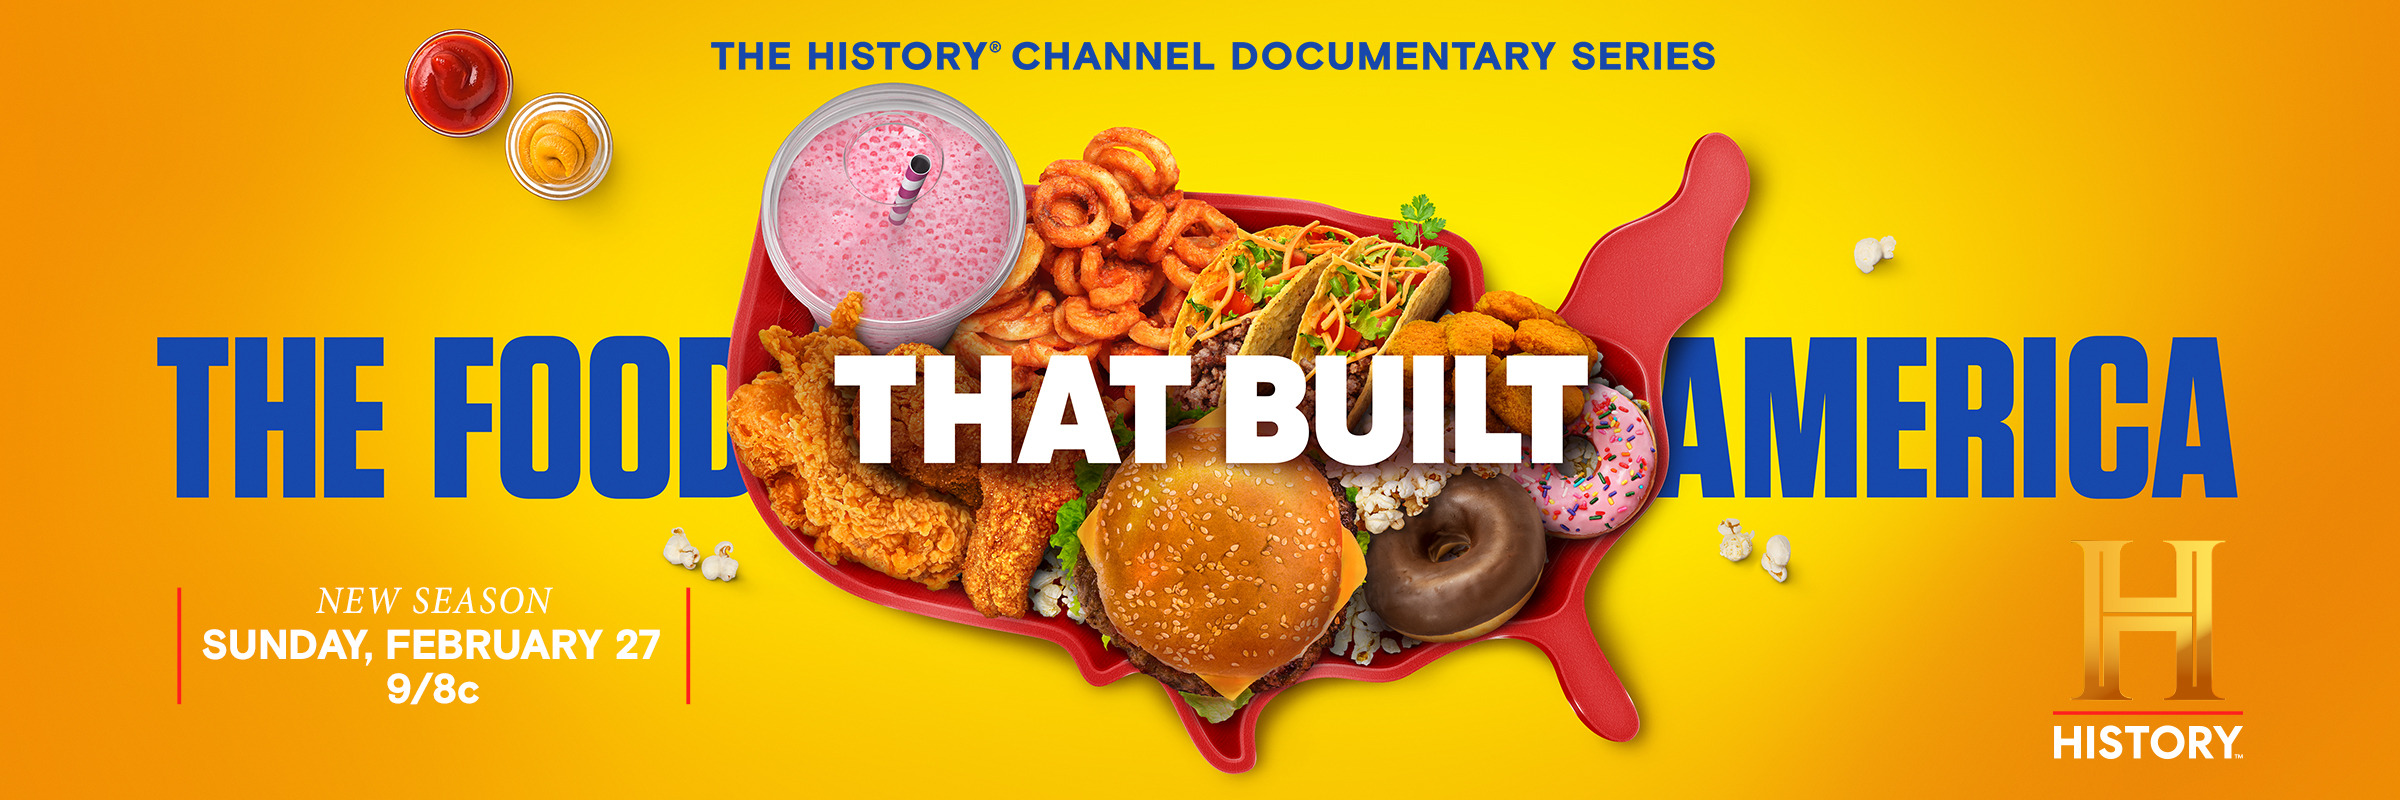 Mega Sized TV Poster Image for The Food That Built America (#8 of 16)